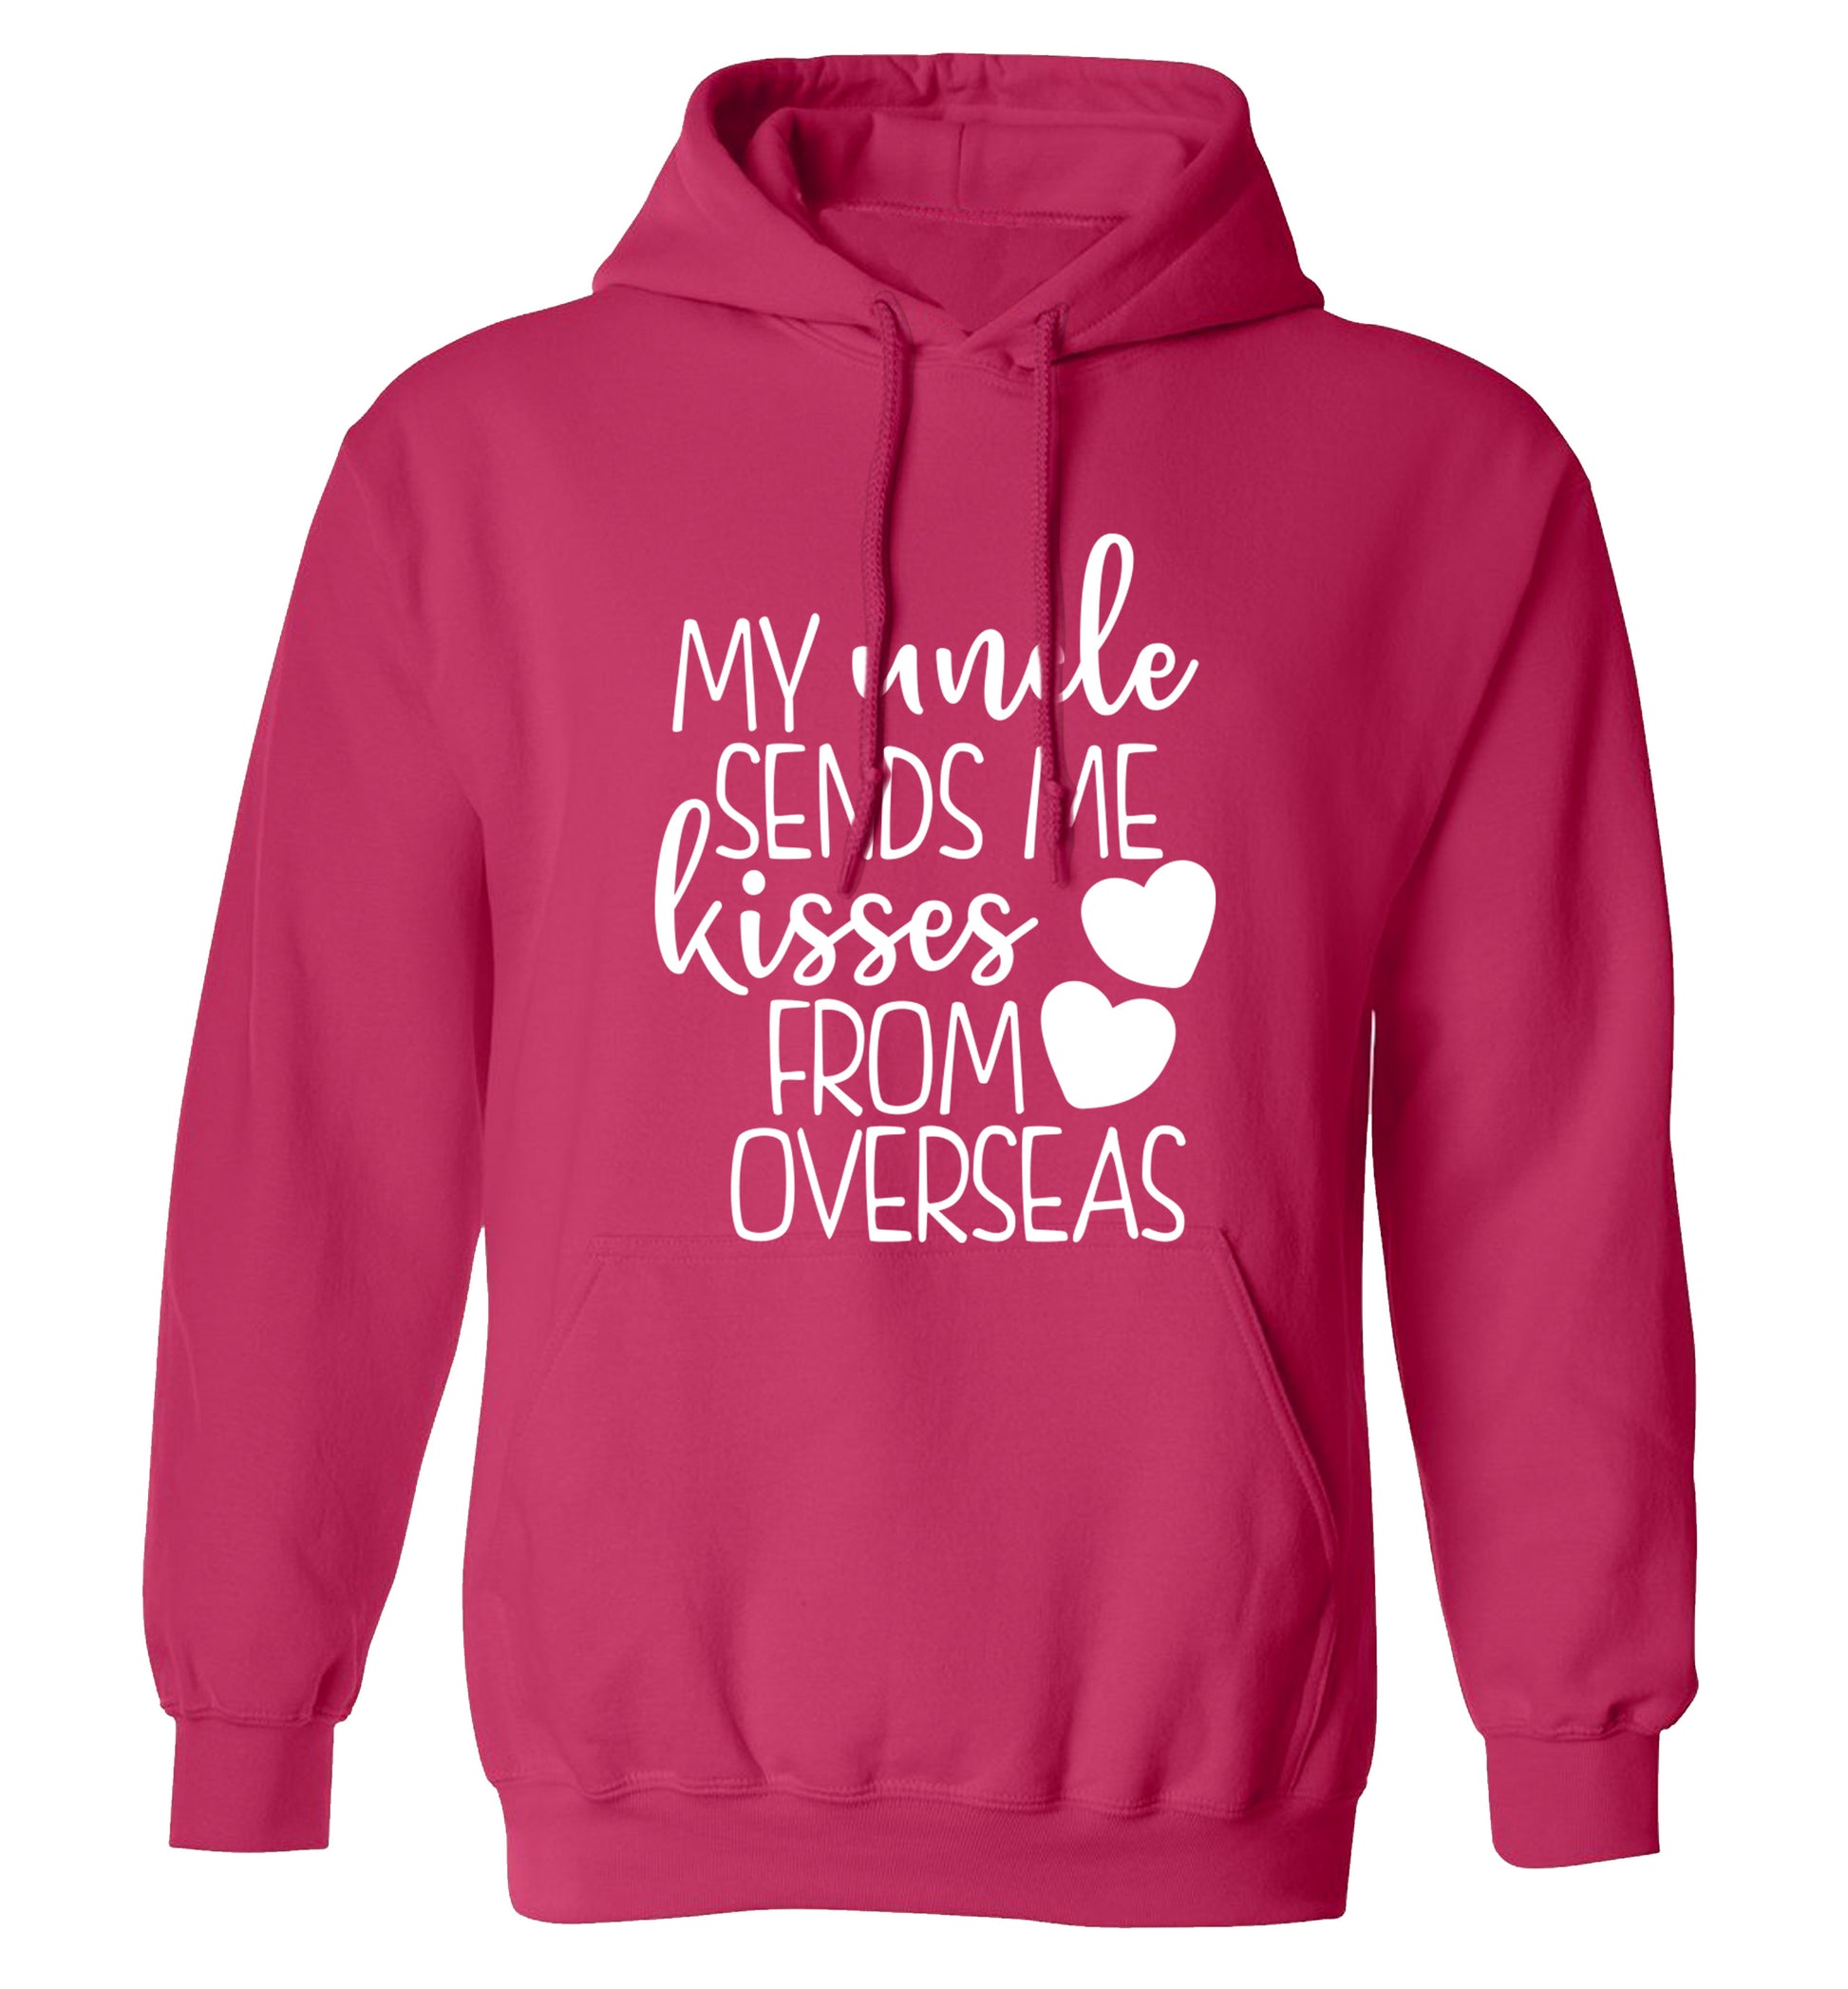 My uncle sends me kisses from overseas adults unisex pink hoodie 2XL